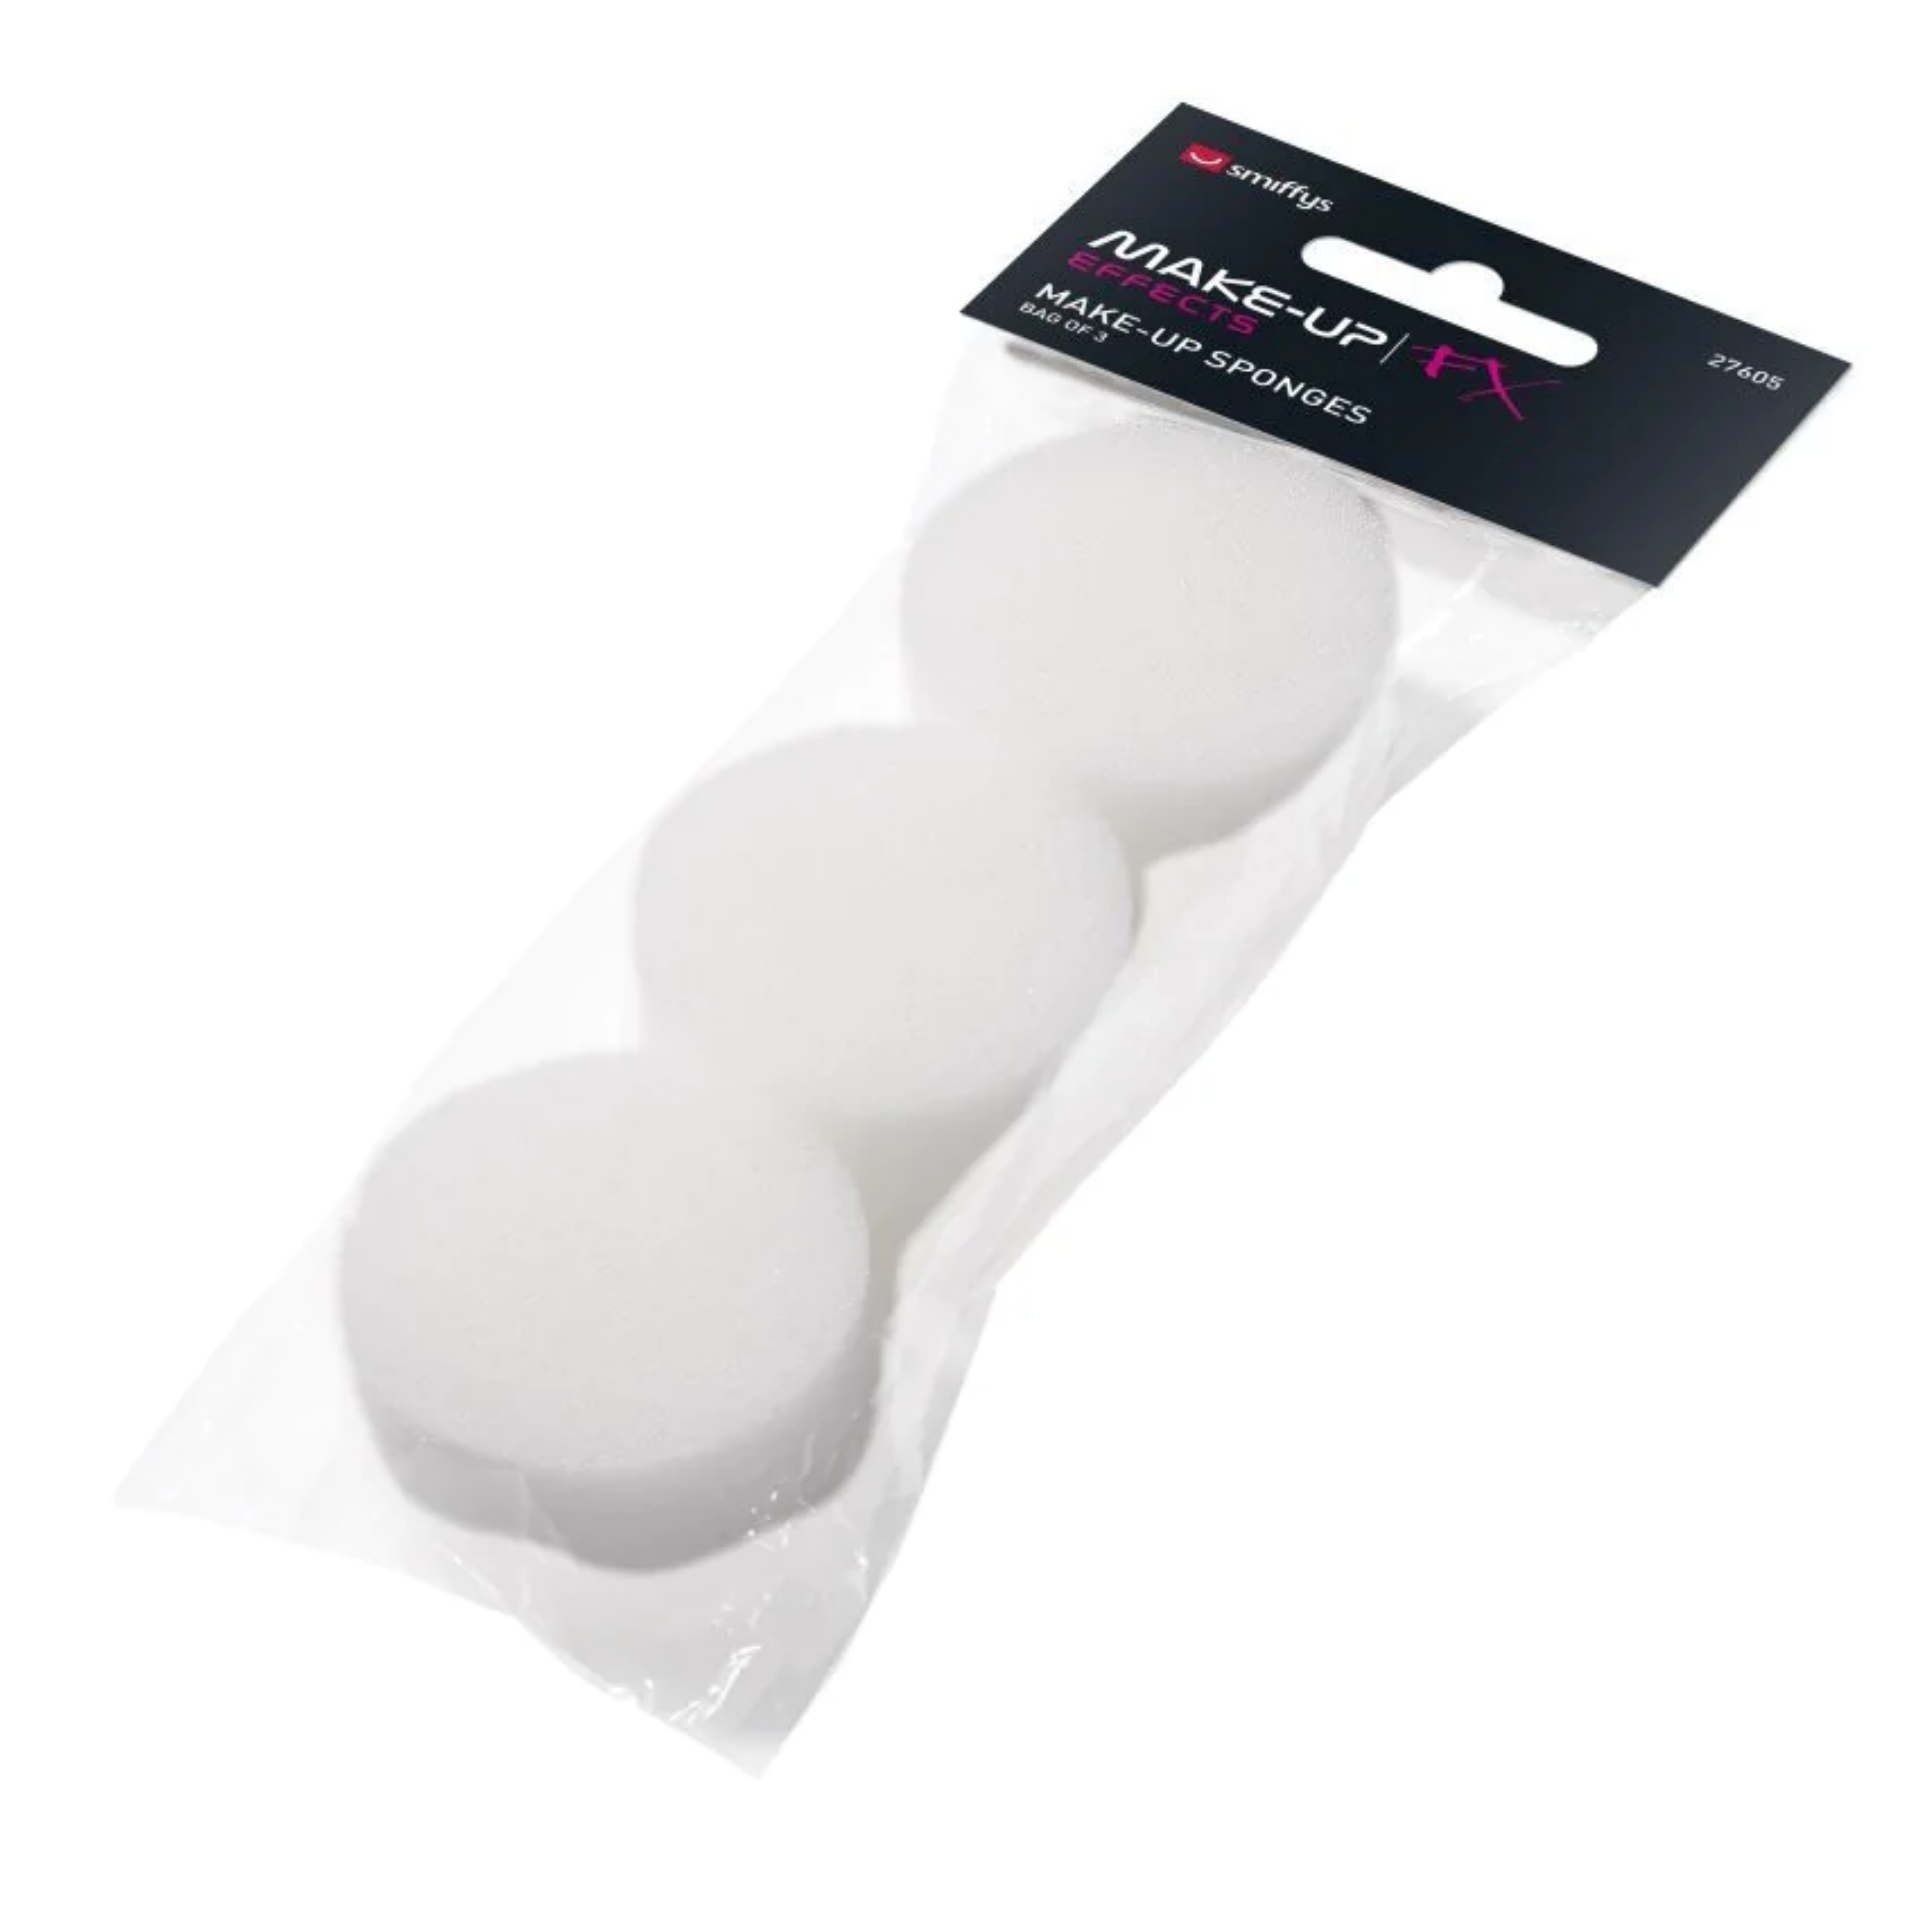 Smiffys Make-Up FX Essentials - Cosmetic Sponges